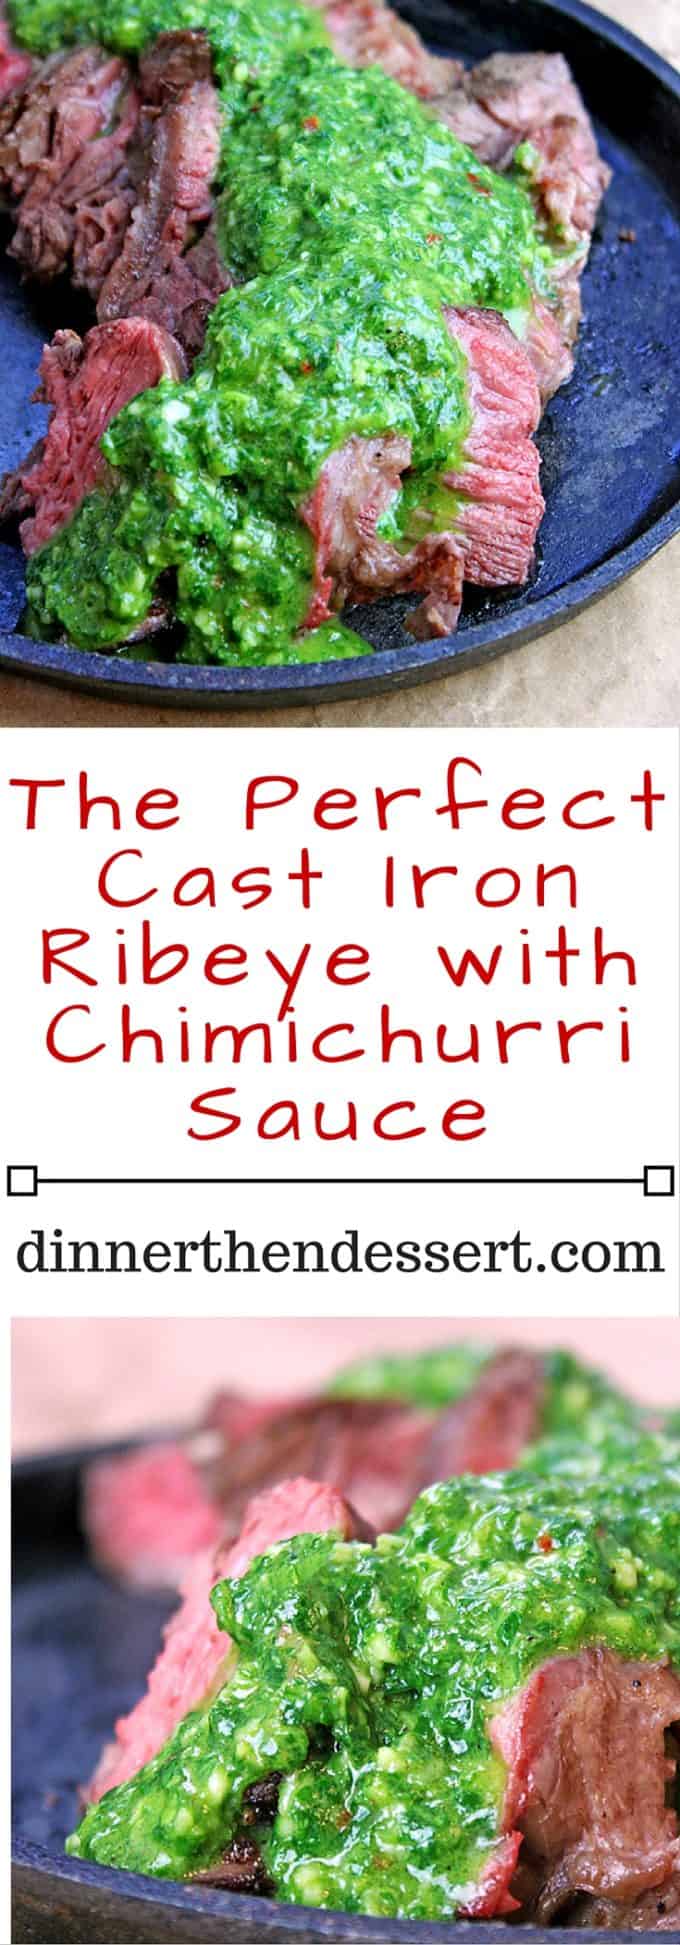 The Perfect Cast Iron Ribeye with Chimichurri Sauce L